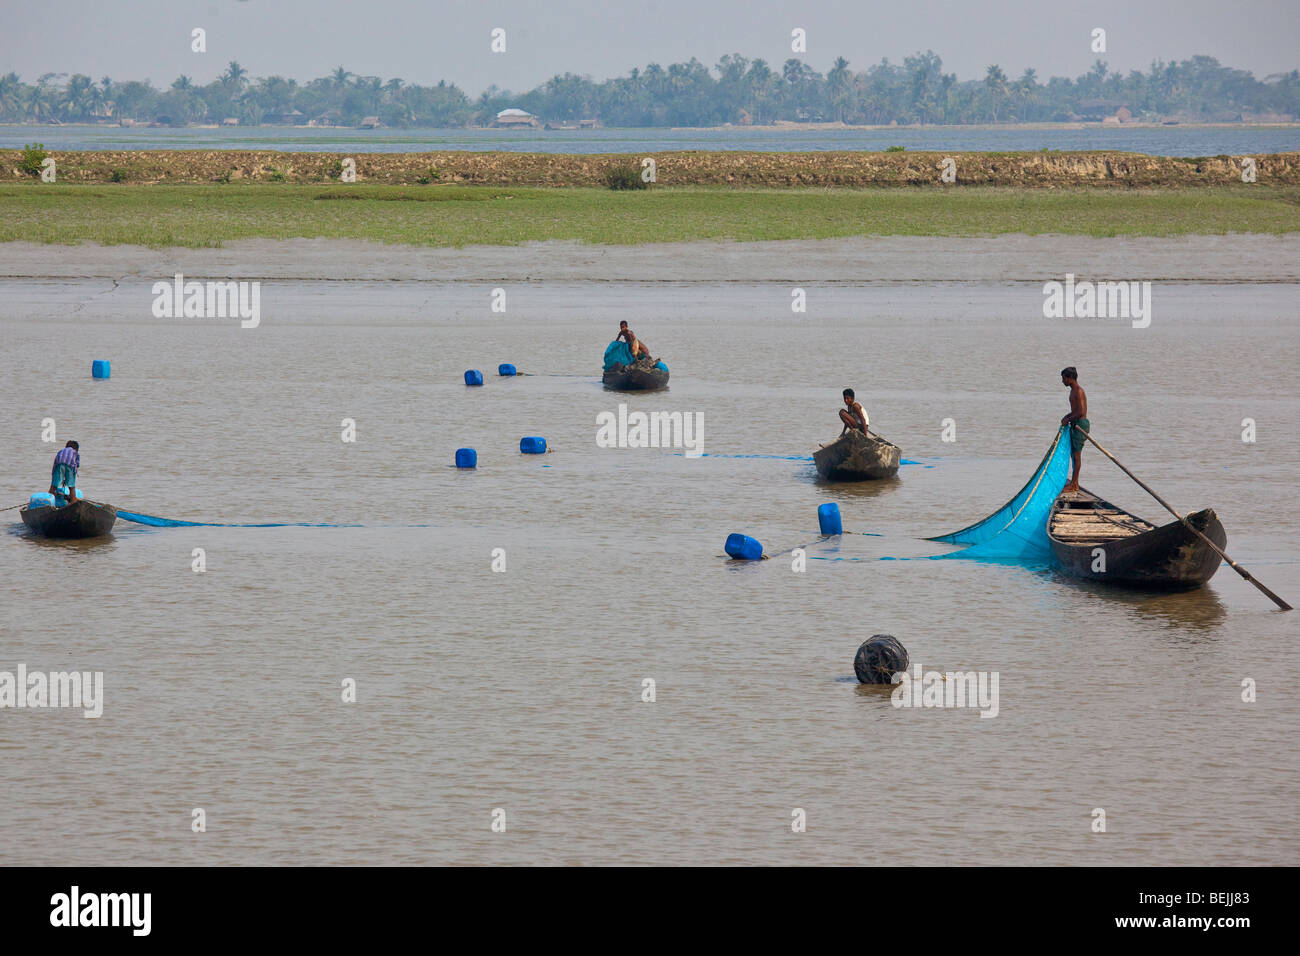 Seen from the Rocket: Fishing Boats on the Brahmaputra River in Bangladesh Stock Photo